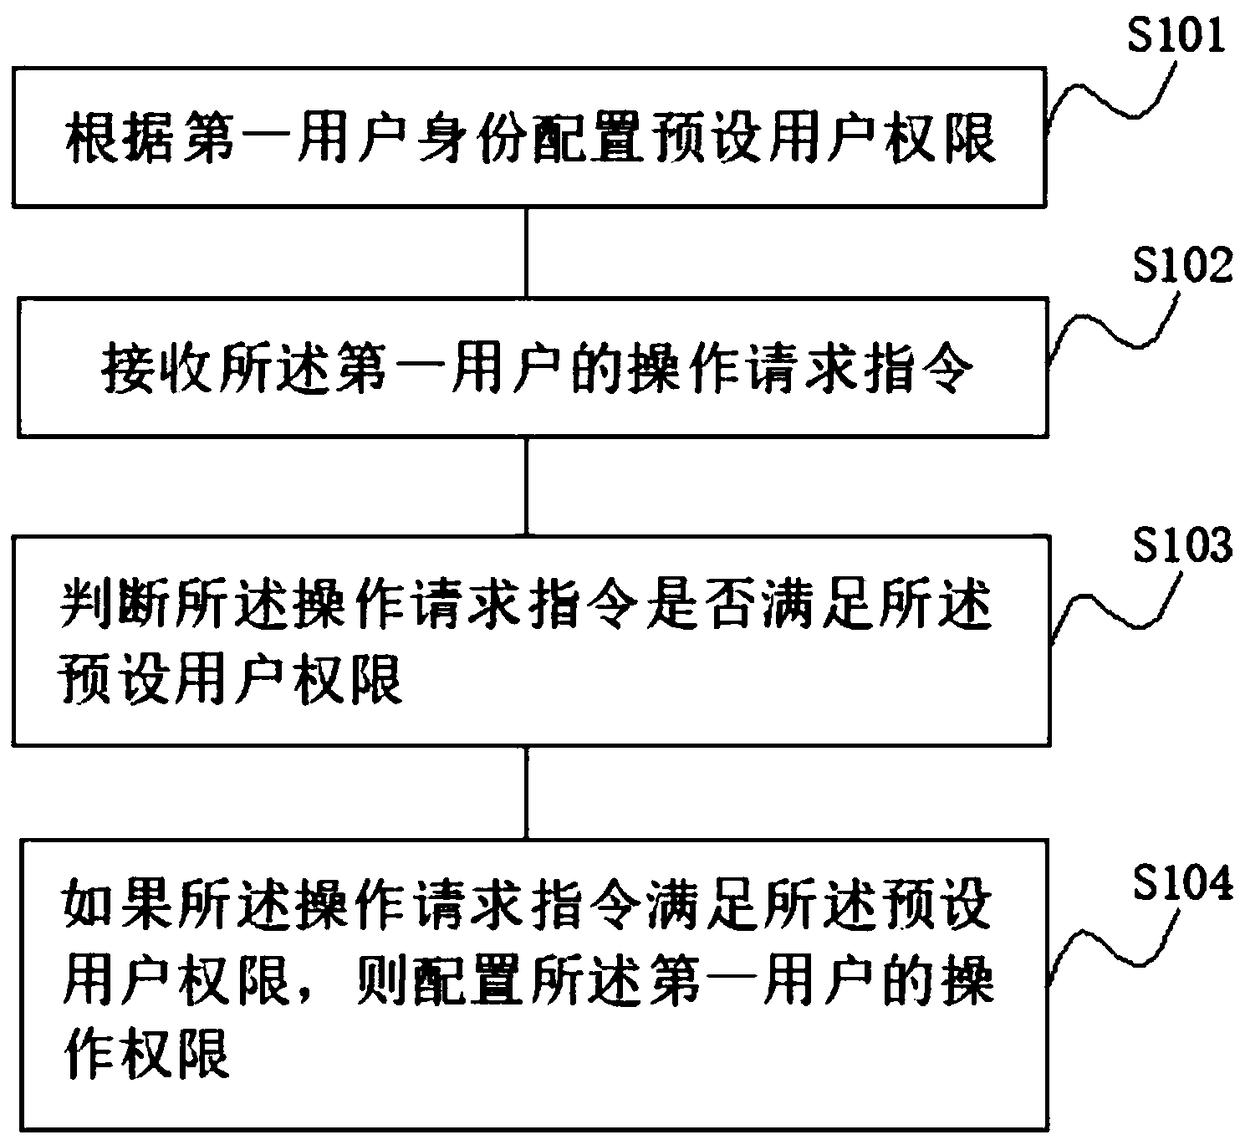 User permission management method and device